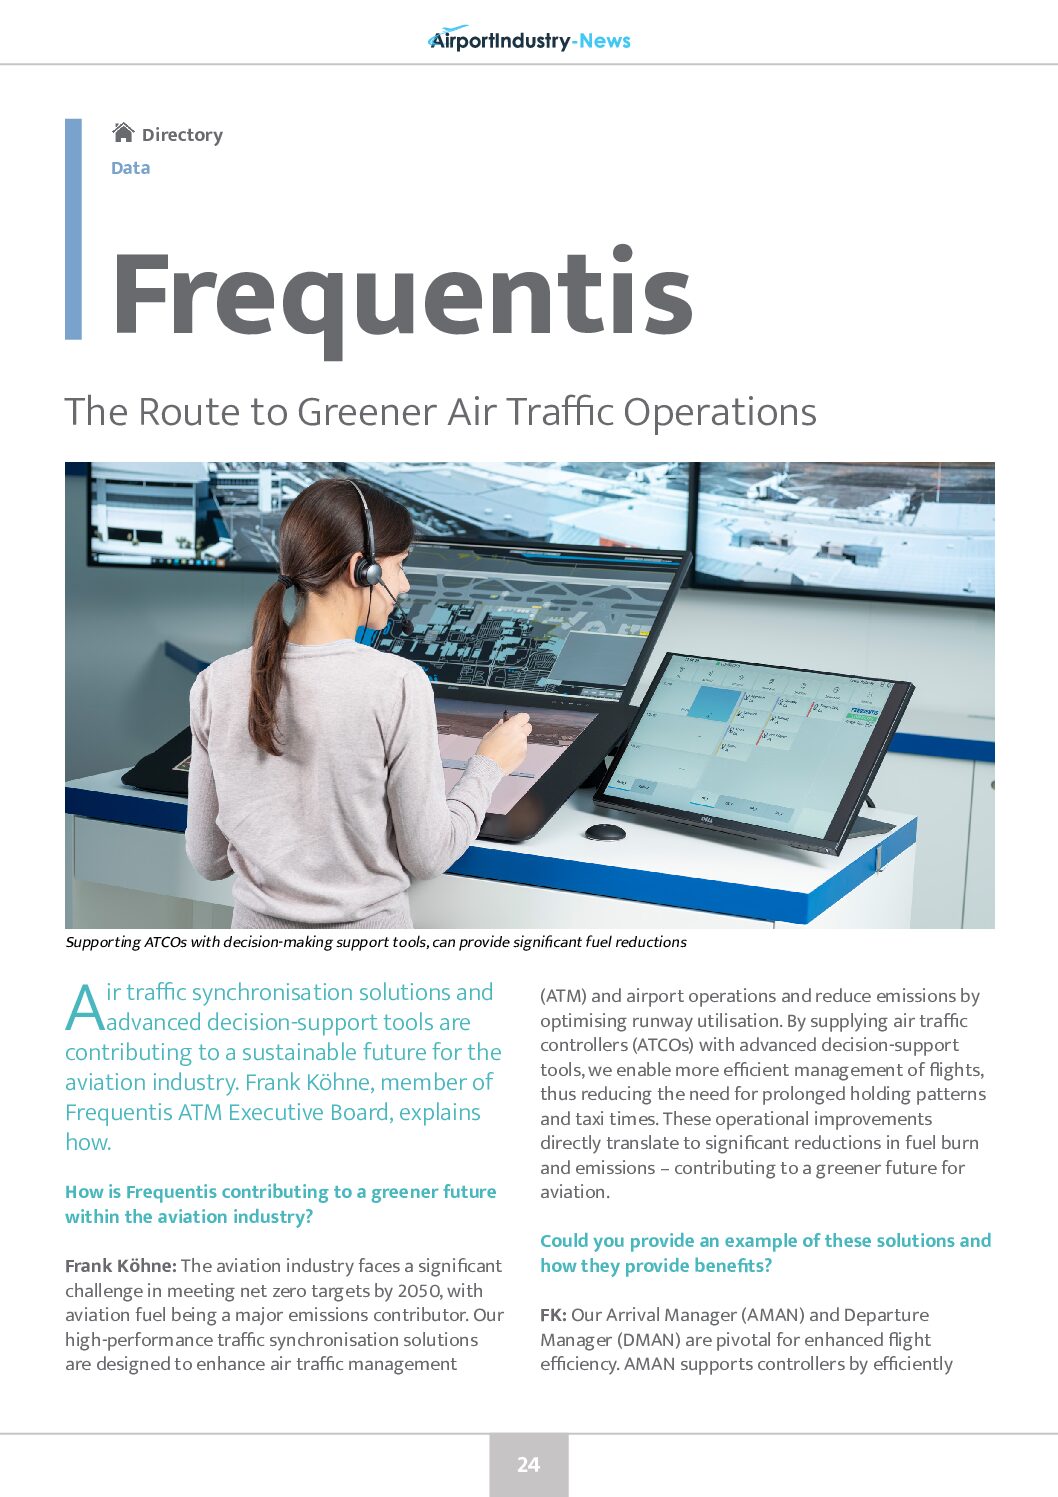 The Route to Greener Air Traffic Operations